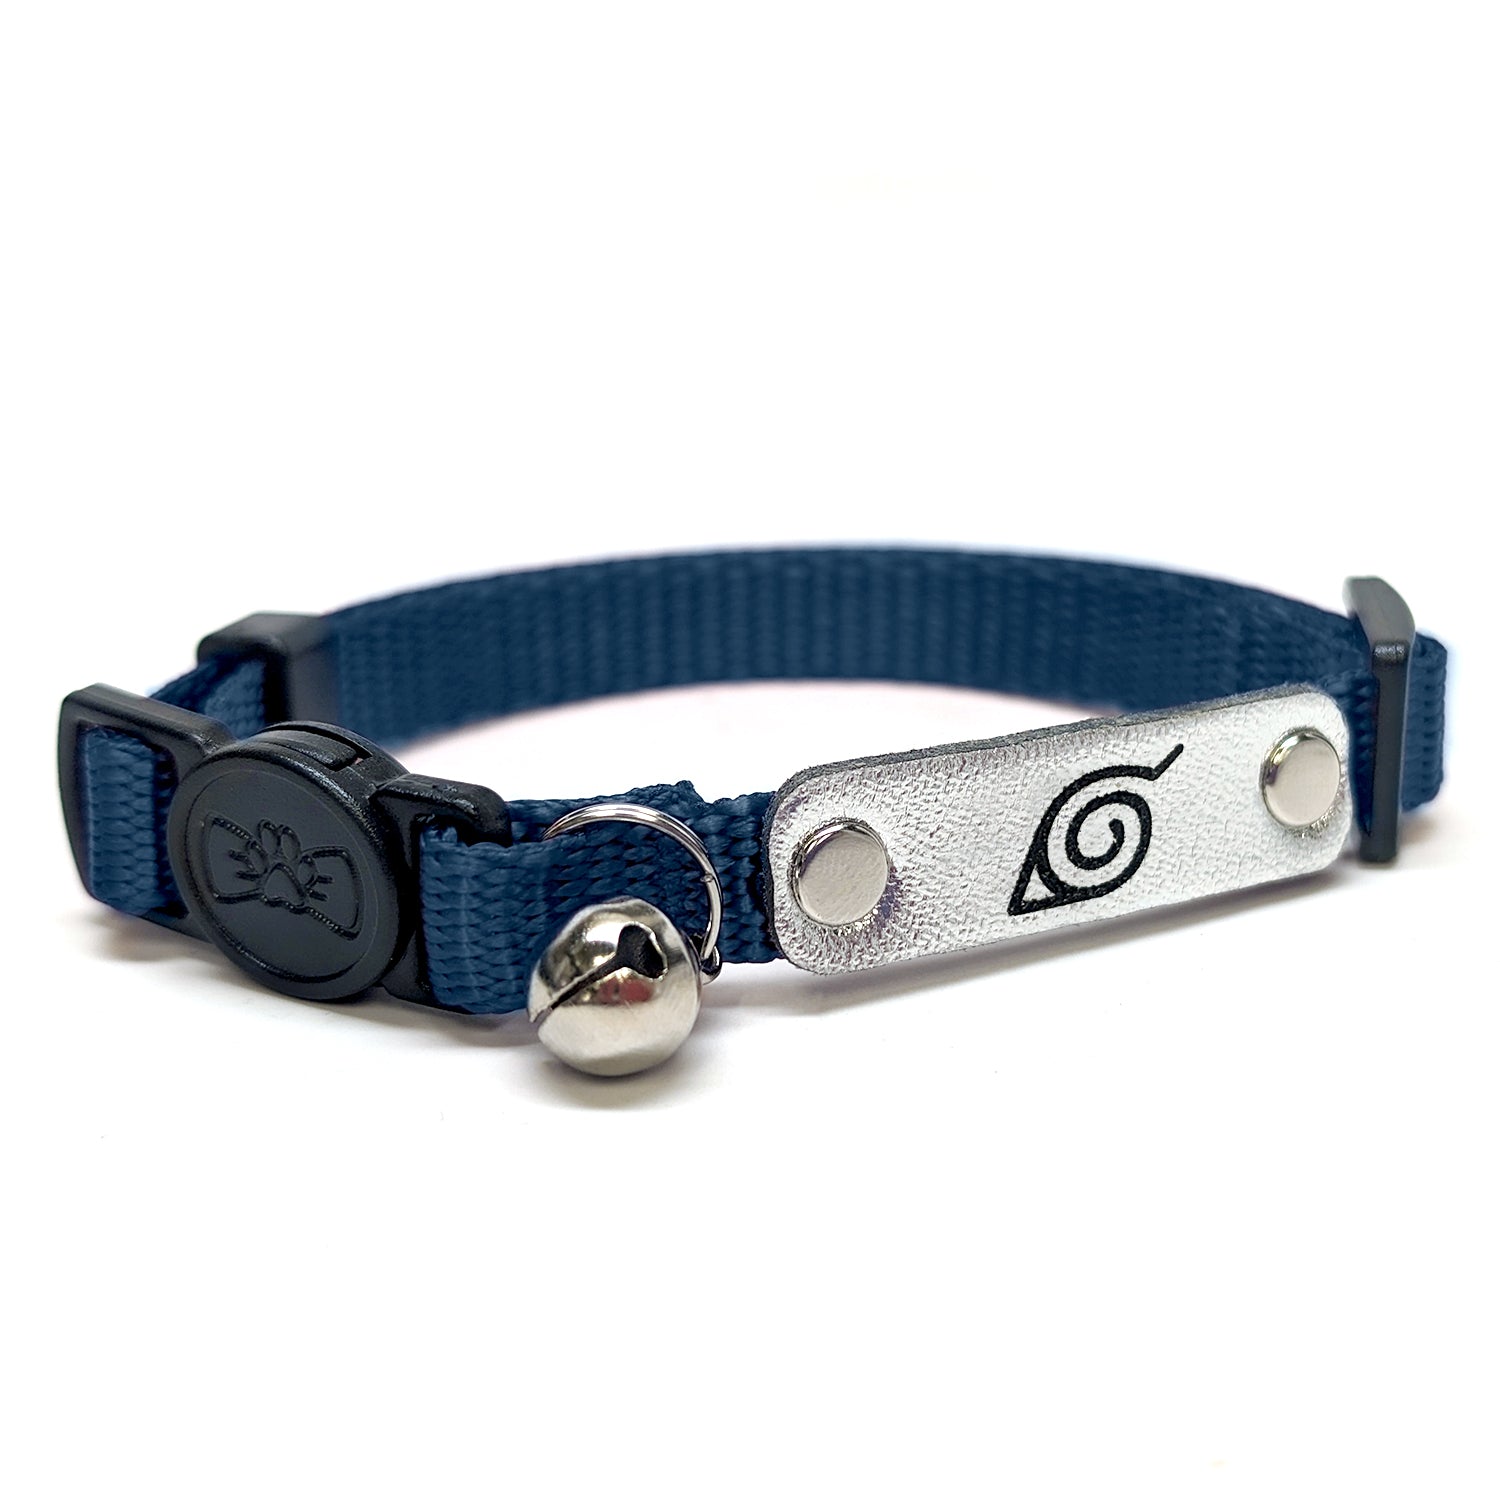 Naruto Shippuden x Pawsonify - Officially Licensed Ninja Collar (Navy) for Cats #size_Cat: 8.5-12